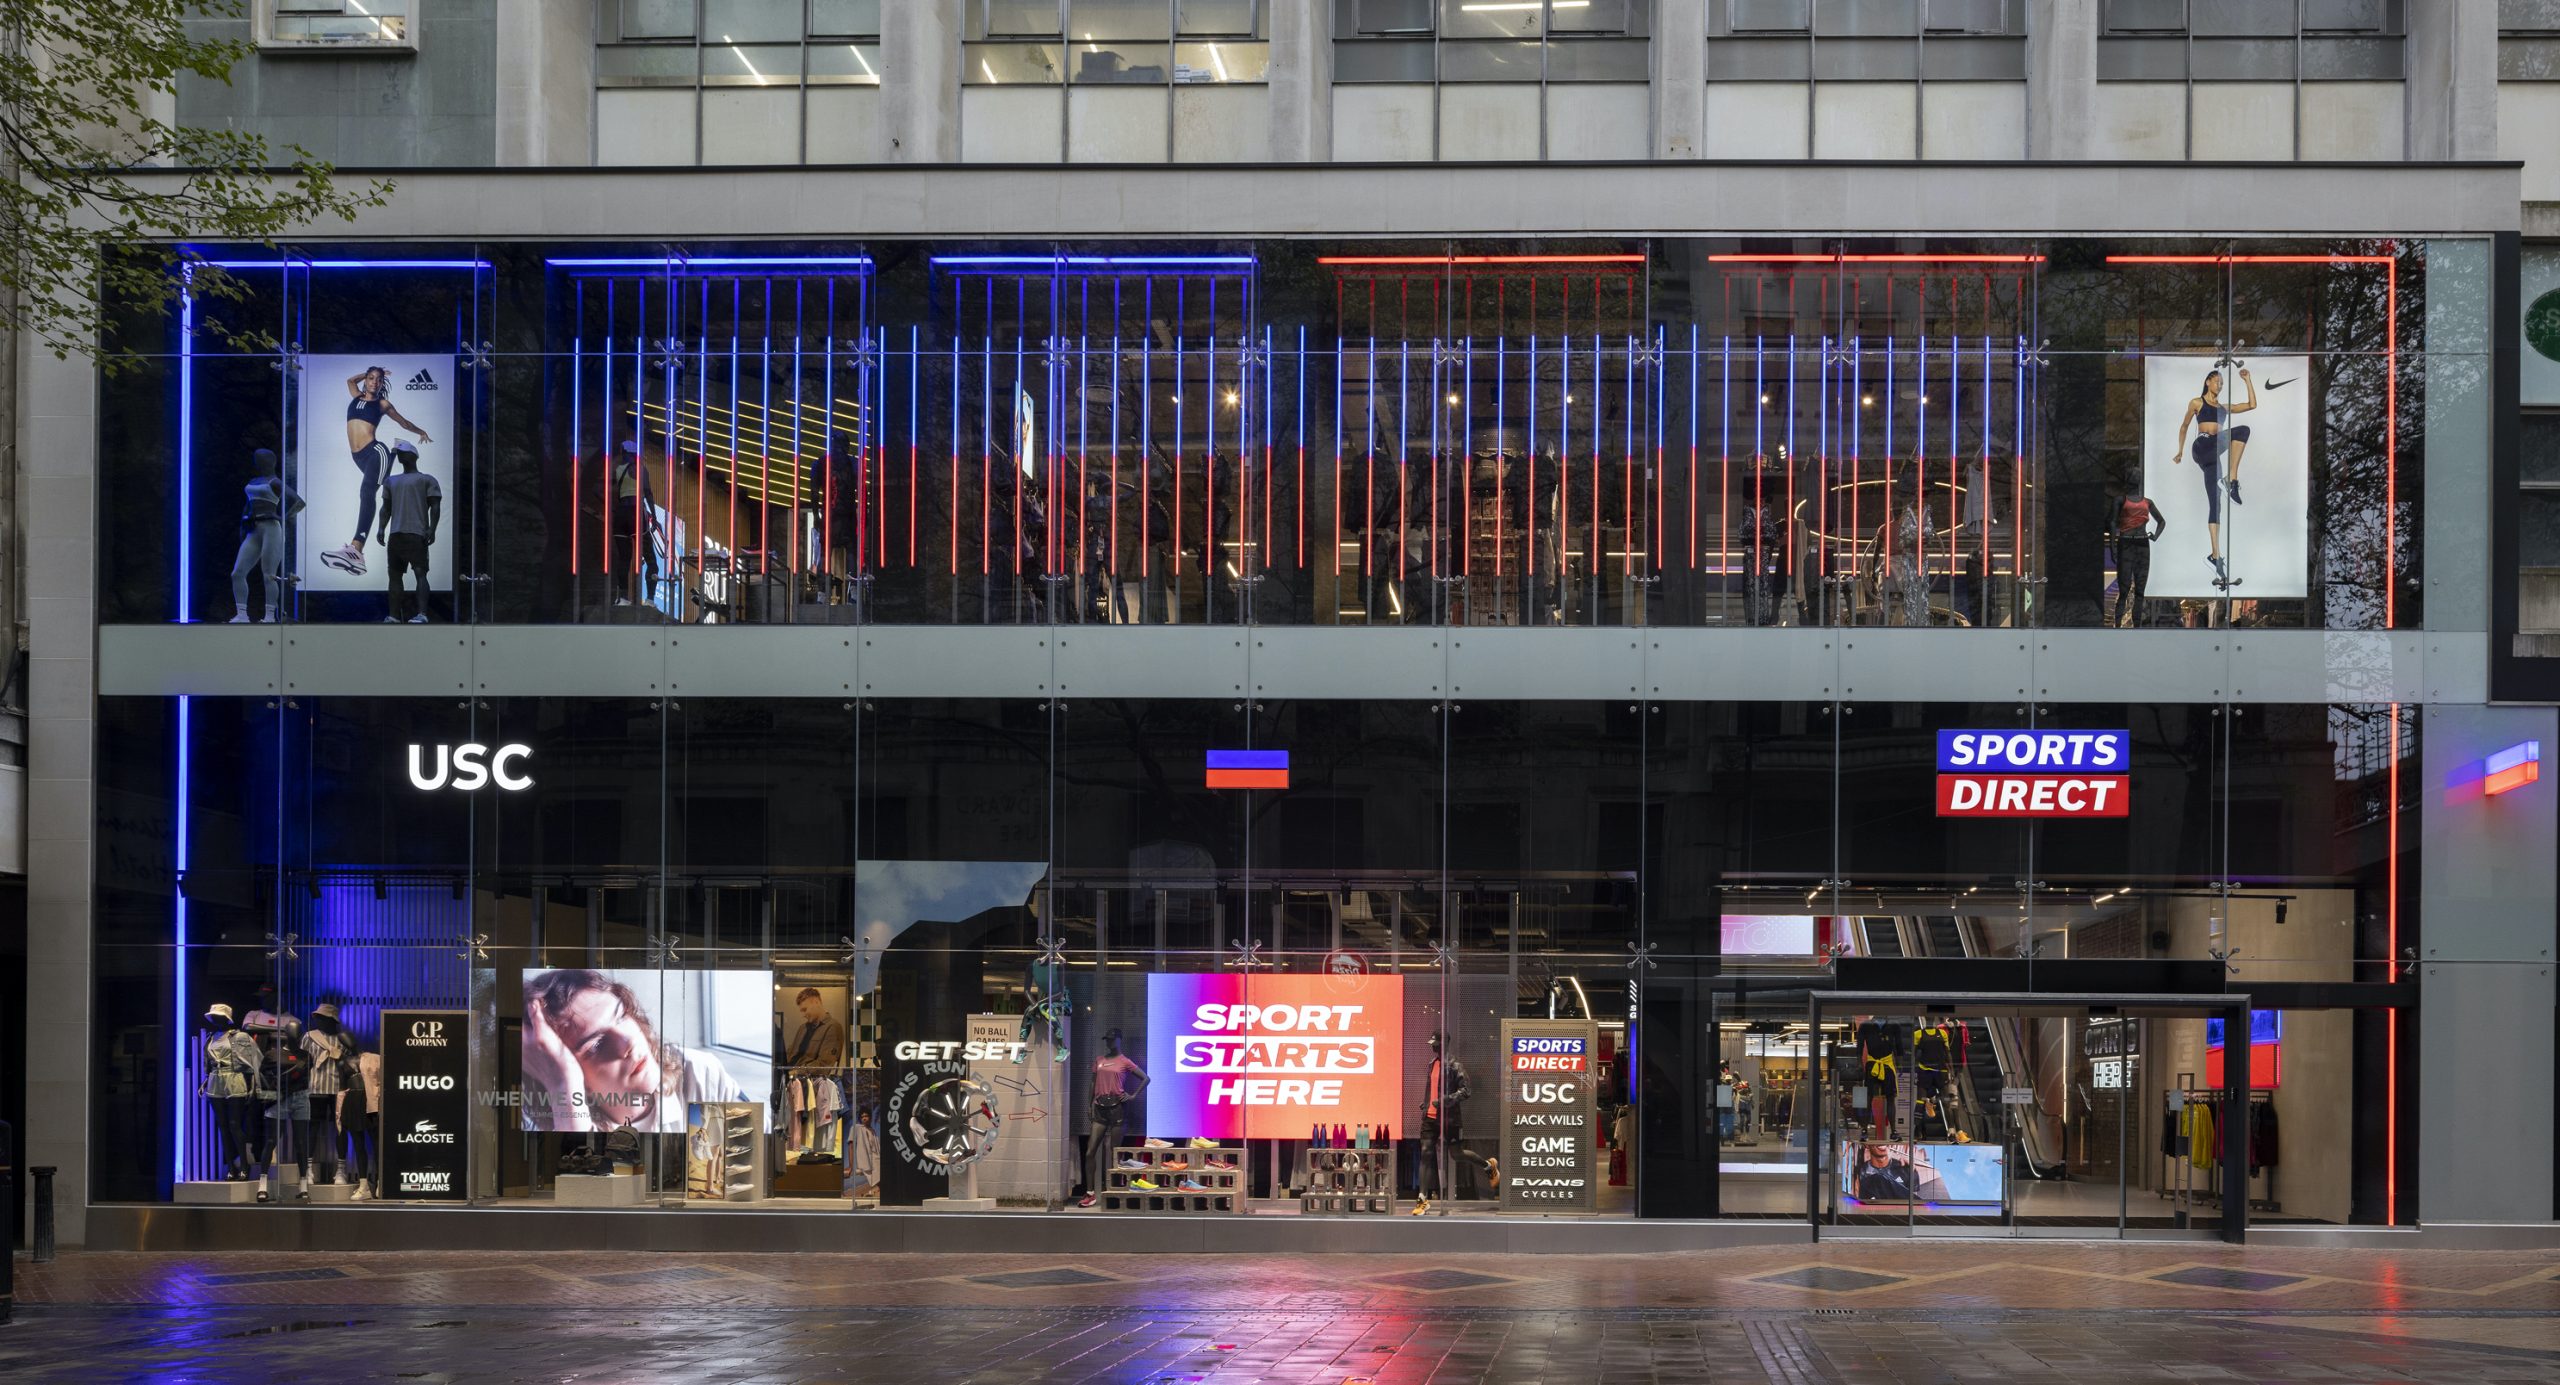 In pictures: Sports Direct's new £10m Birmingham flagship store - Retail  Gazette